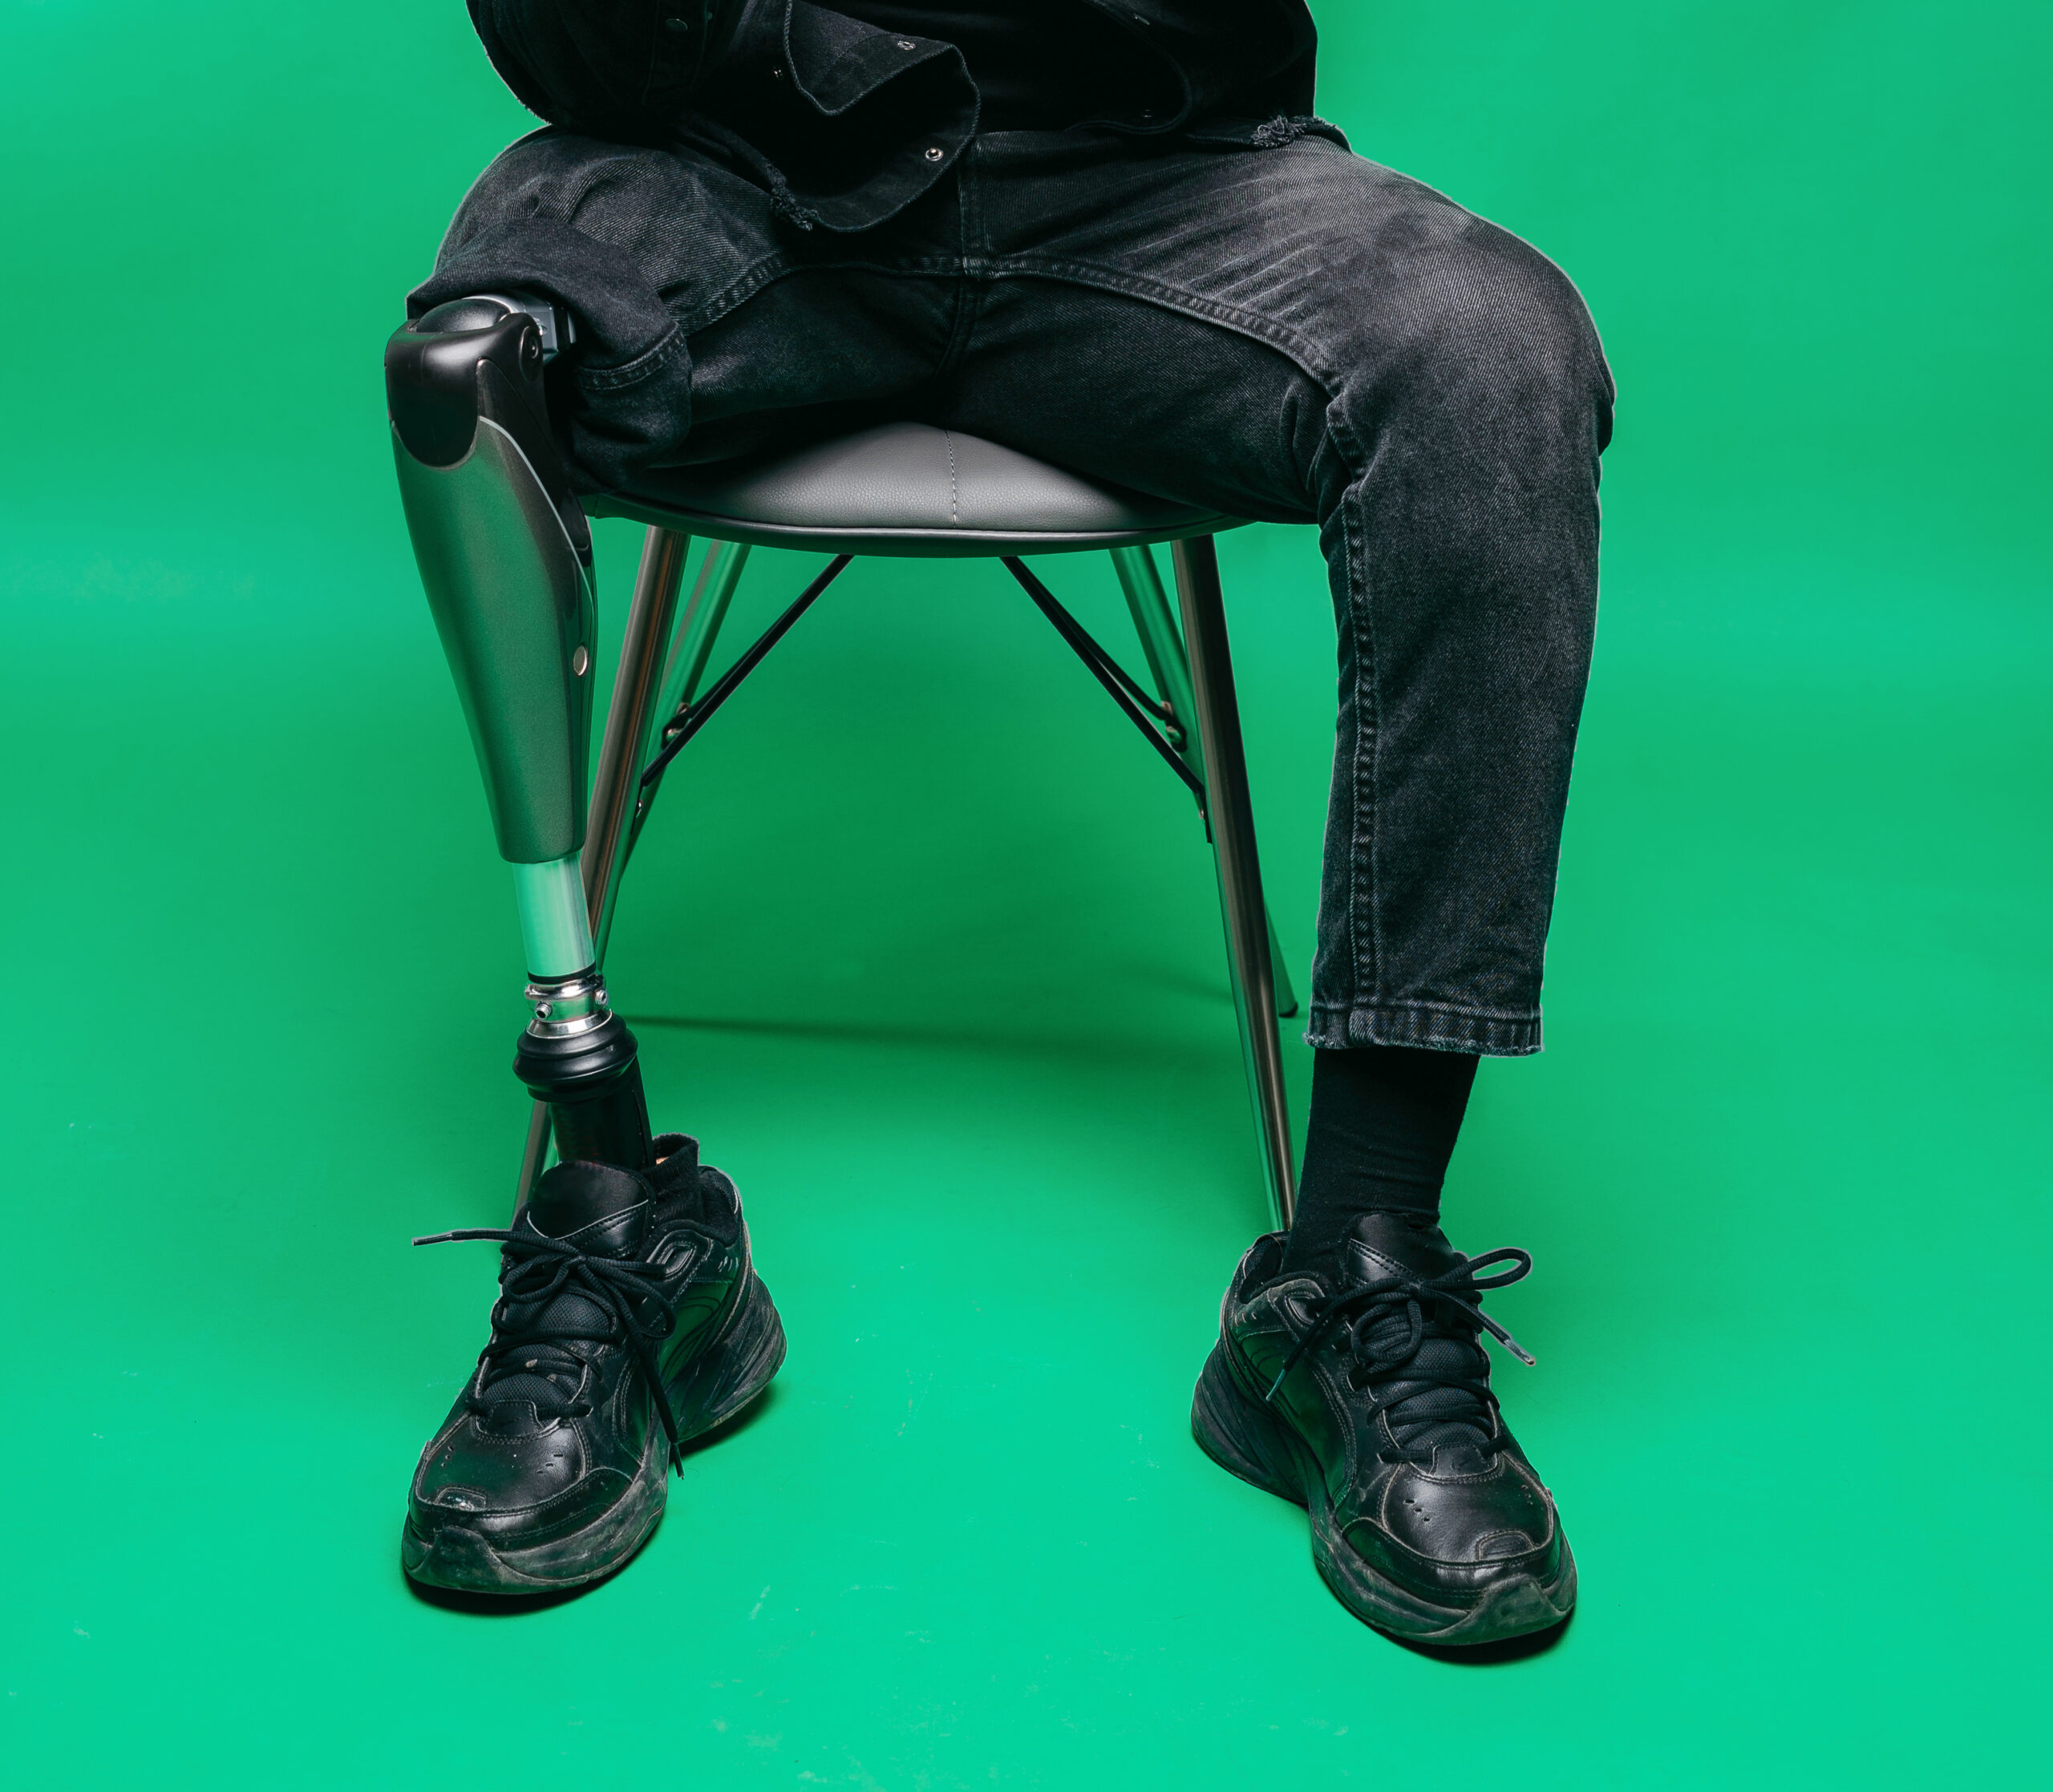 A man with a prosthetic leg sitting in a chair.